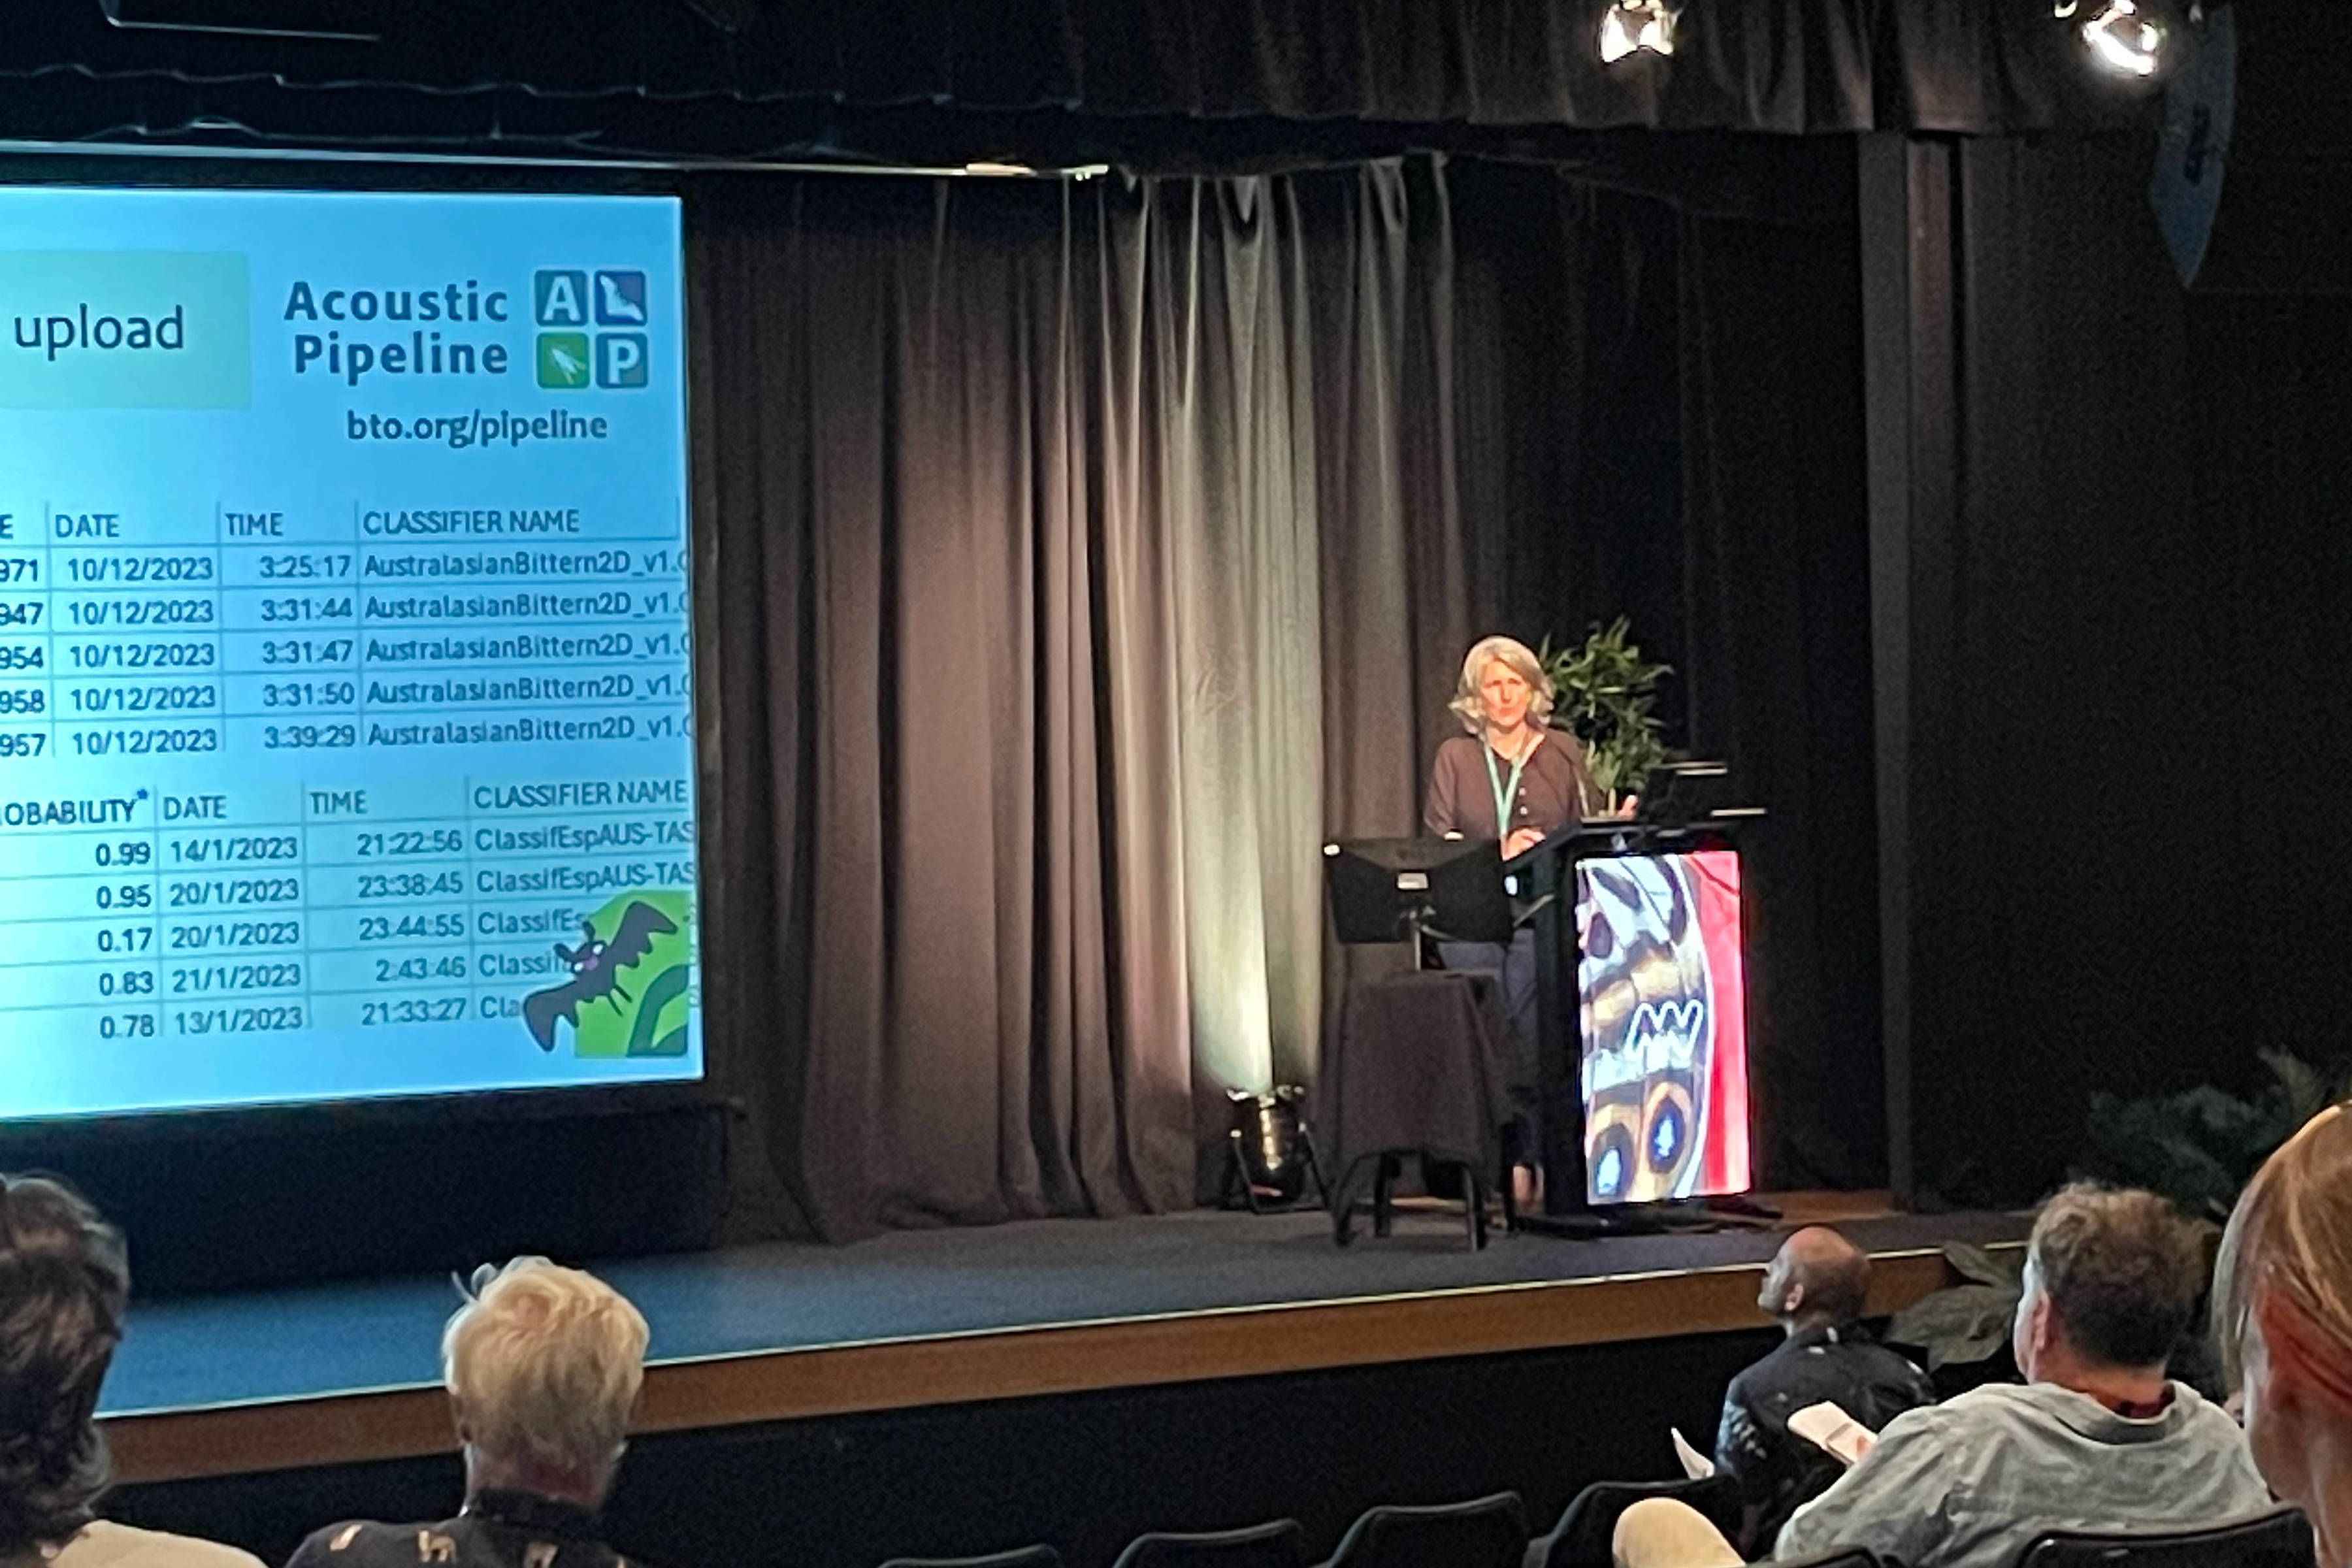 Clare proudly reported everyone’s progress to the Melbourne Ecoacoustics Symposium. Photo: Leanne Wicker.